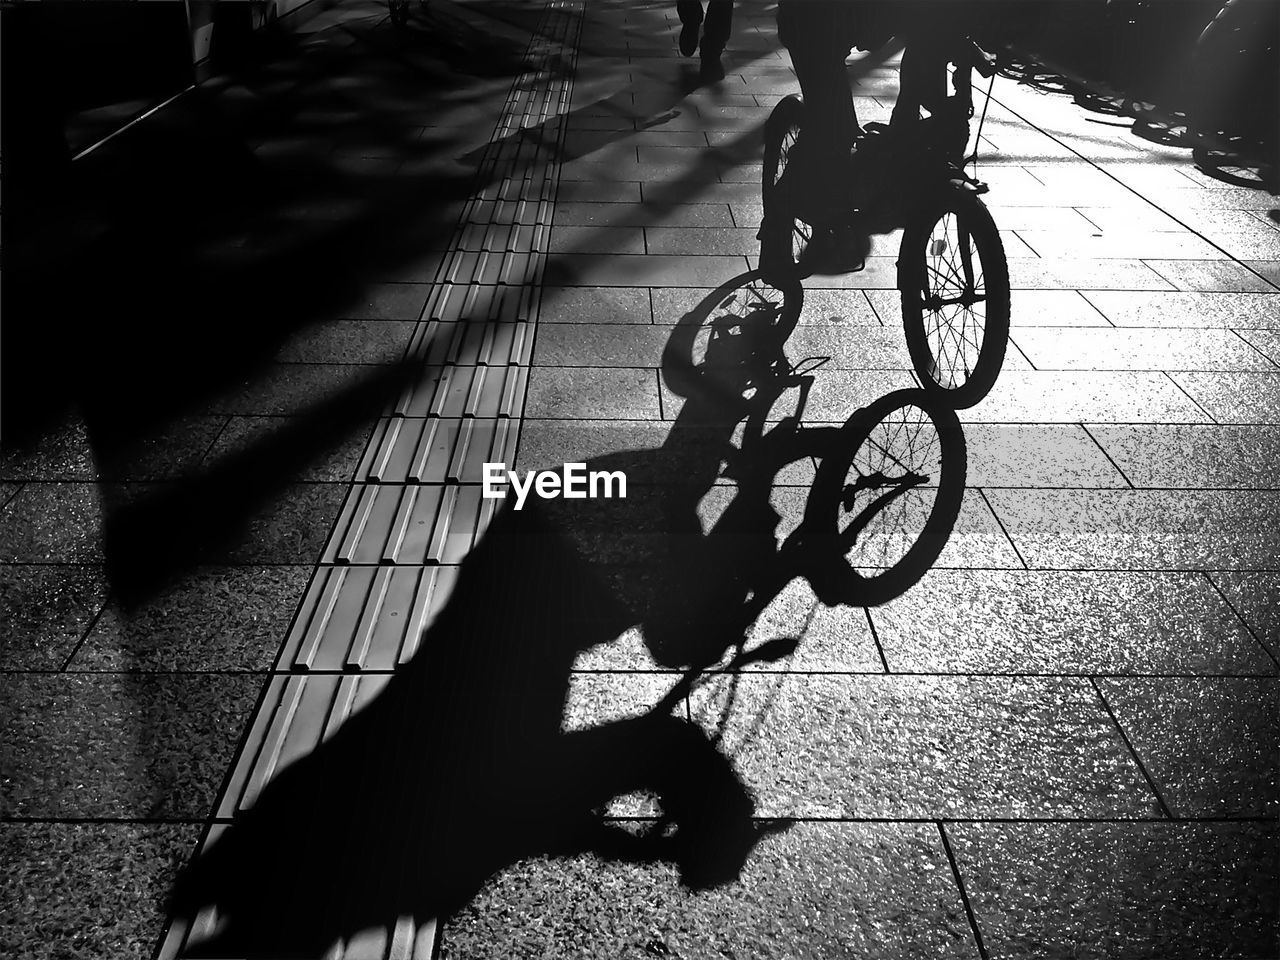 Shadow of person riding bicycle on paving stone